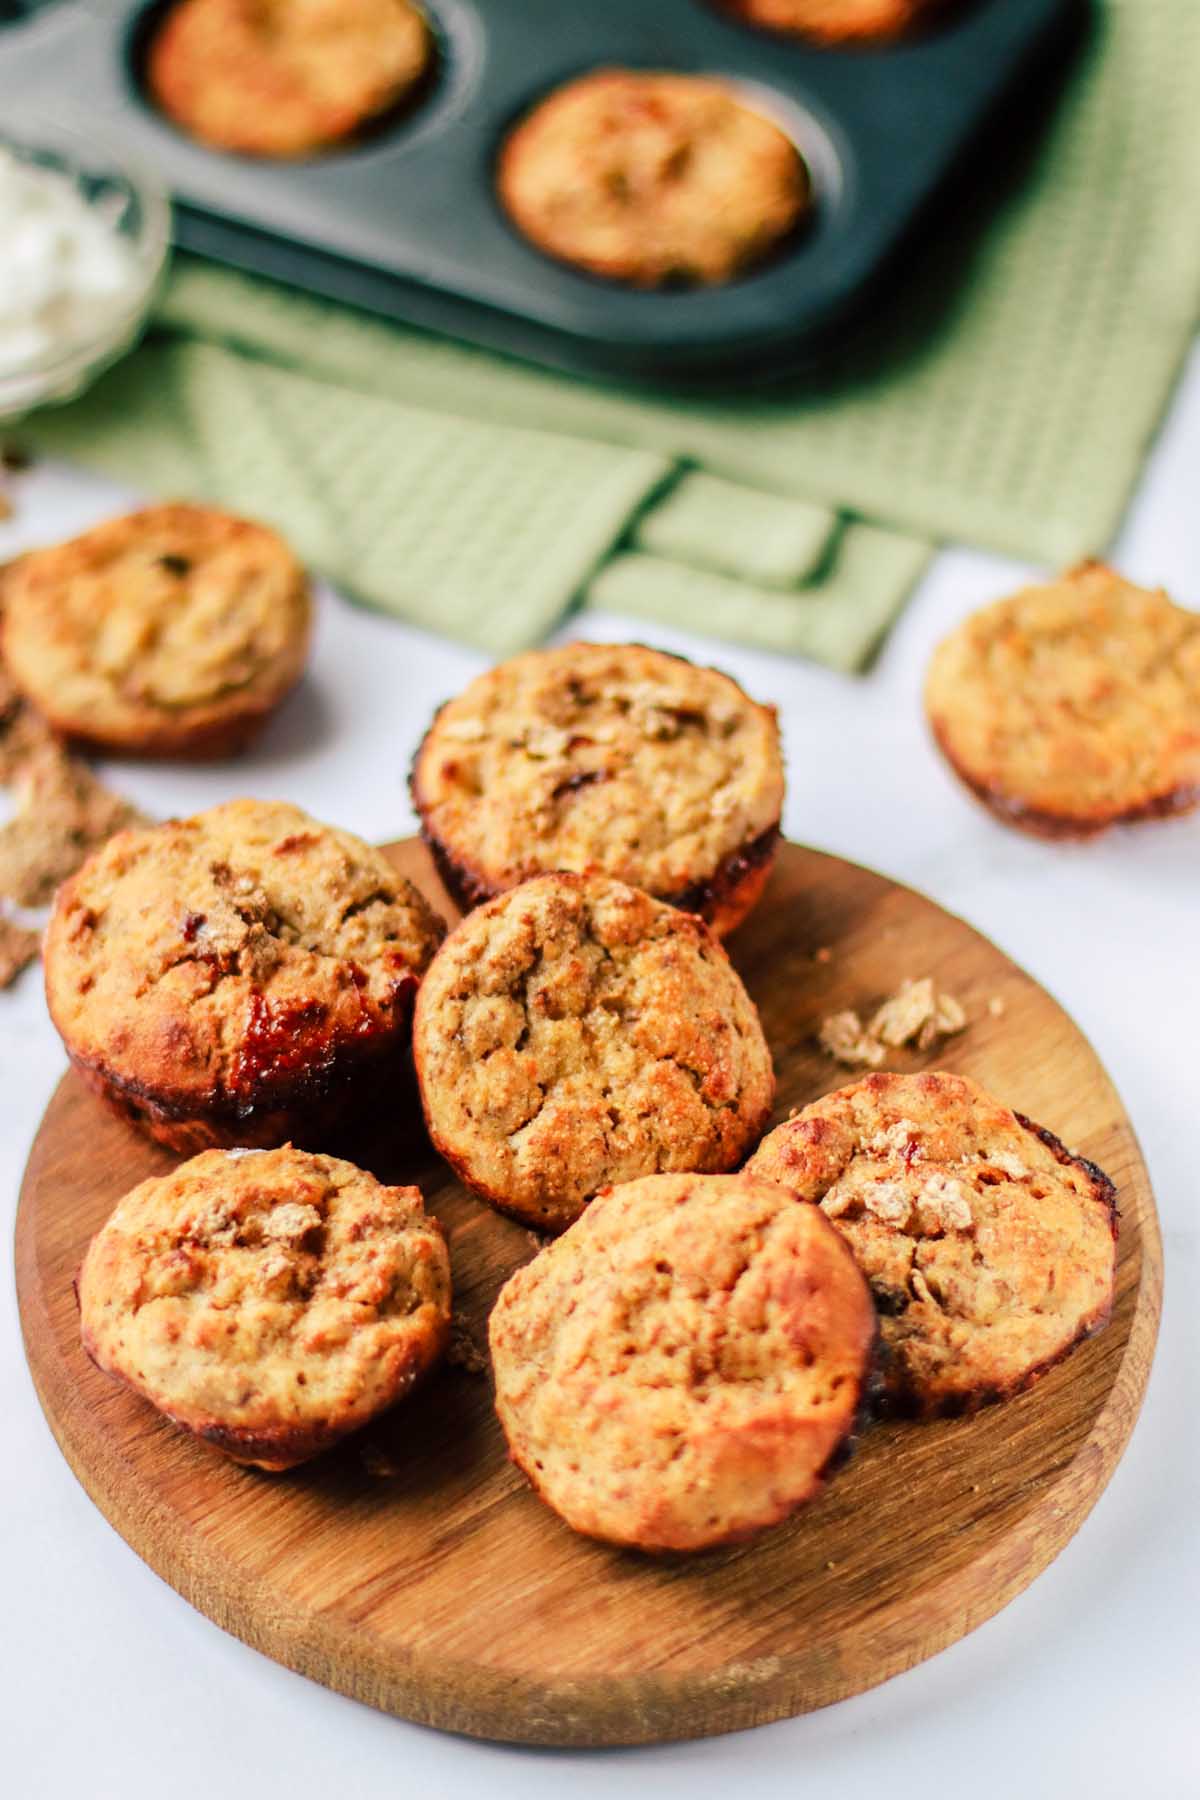 bran muffins stacked on a cutting board.